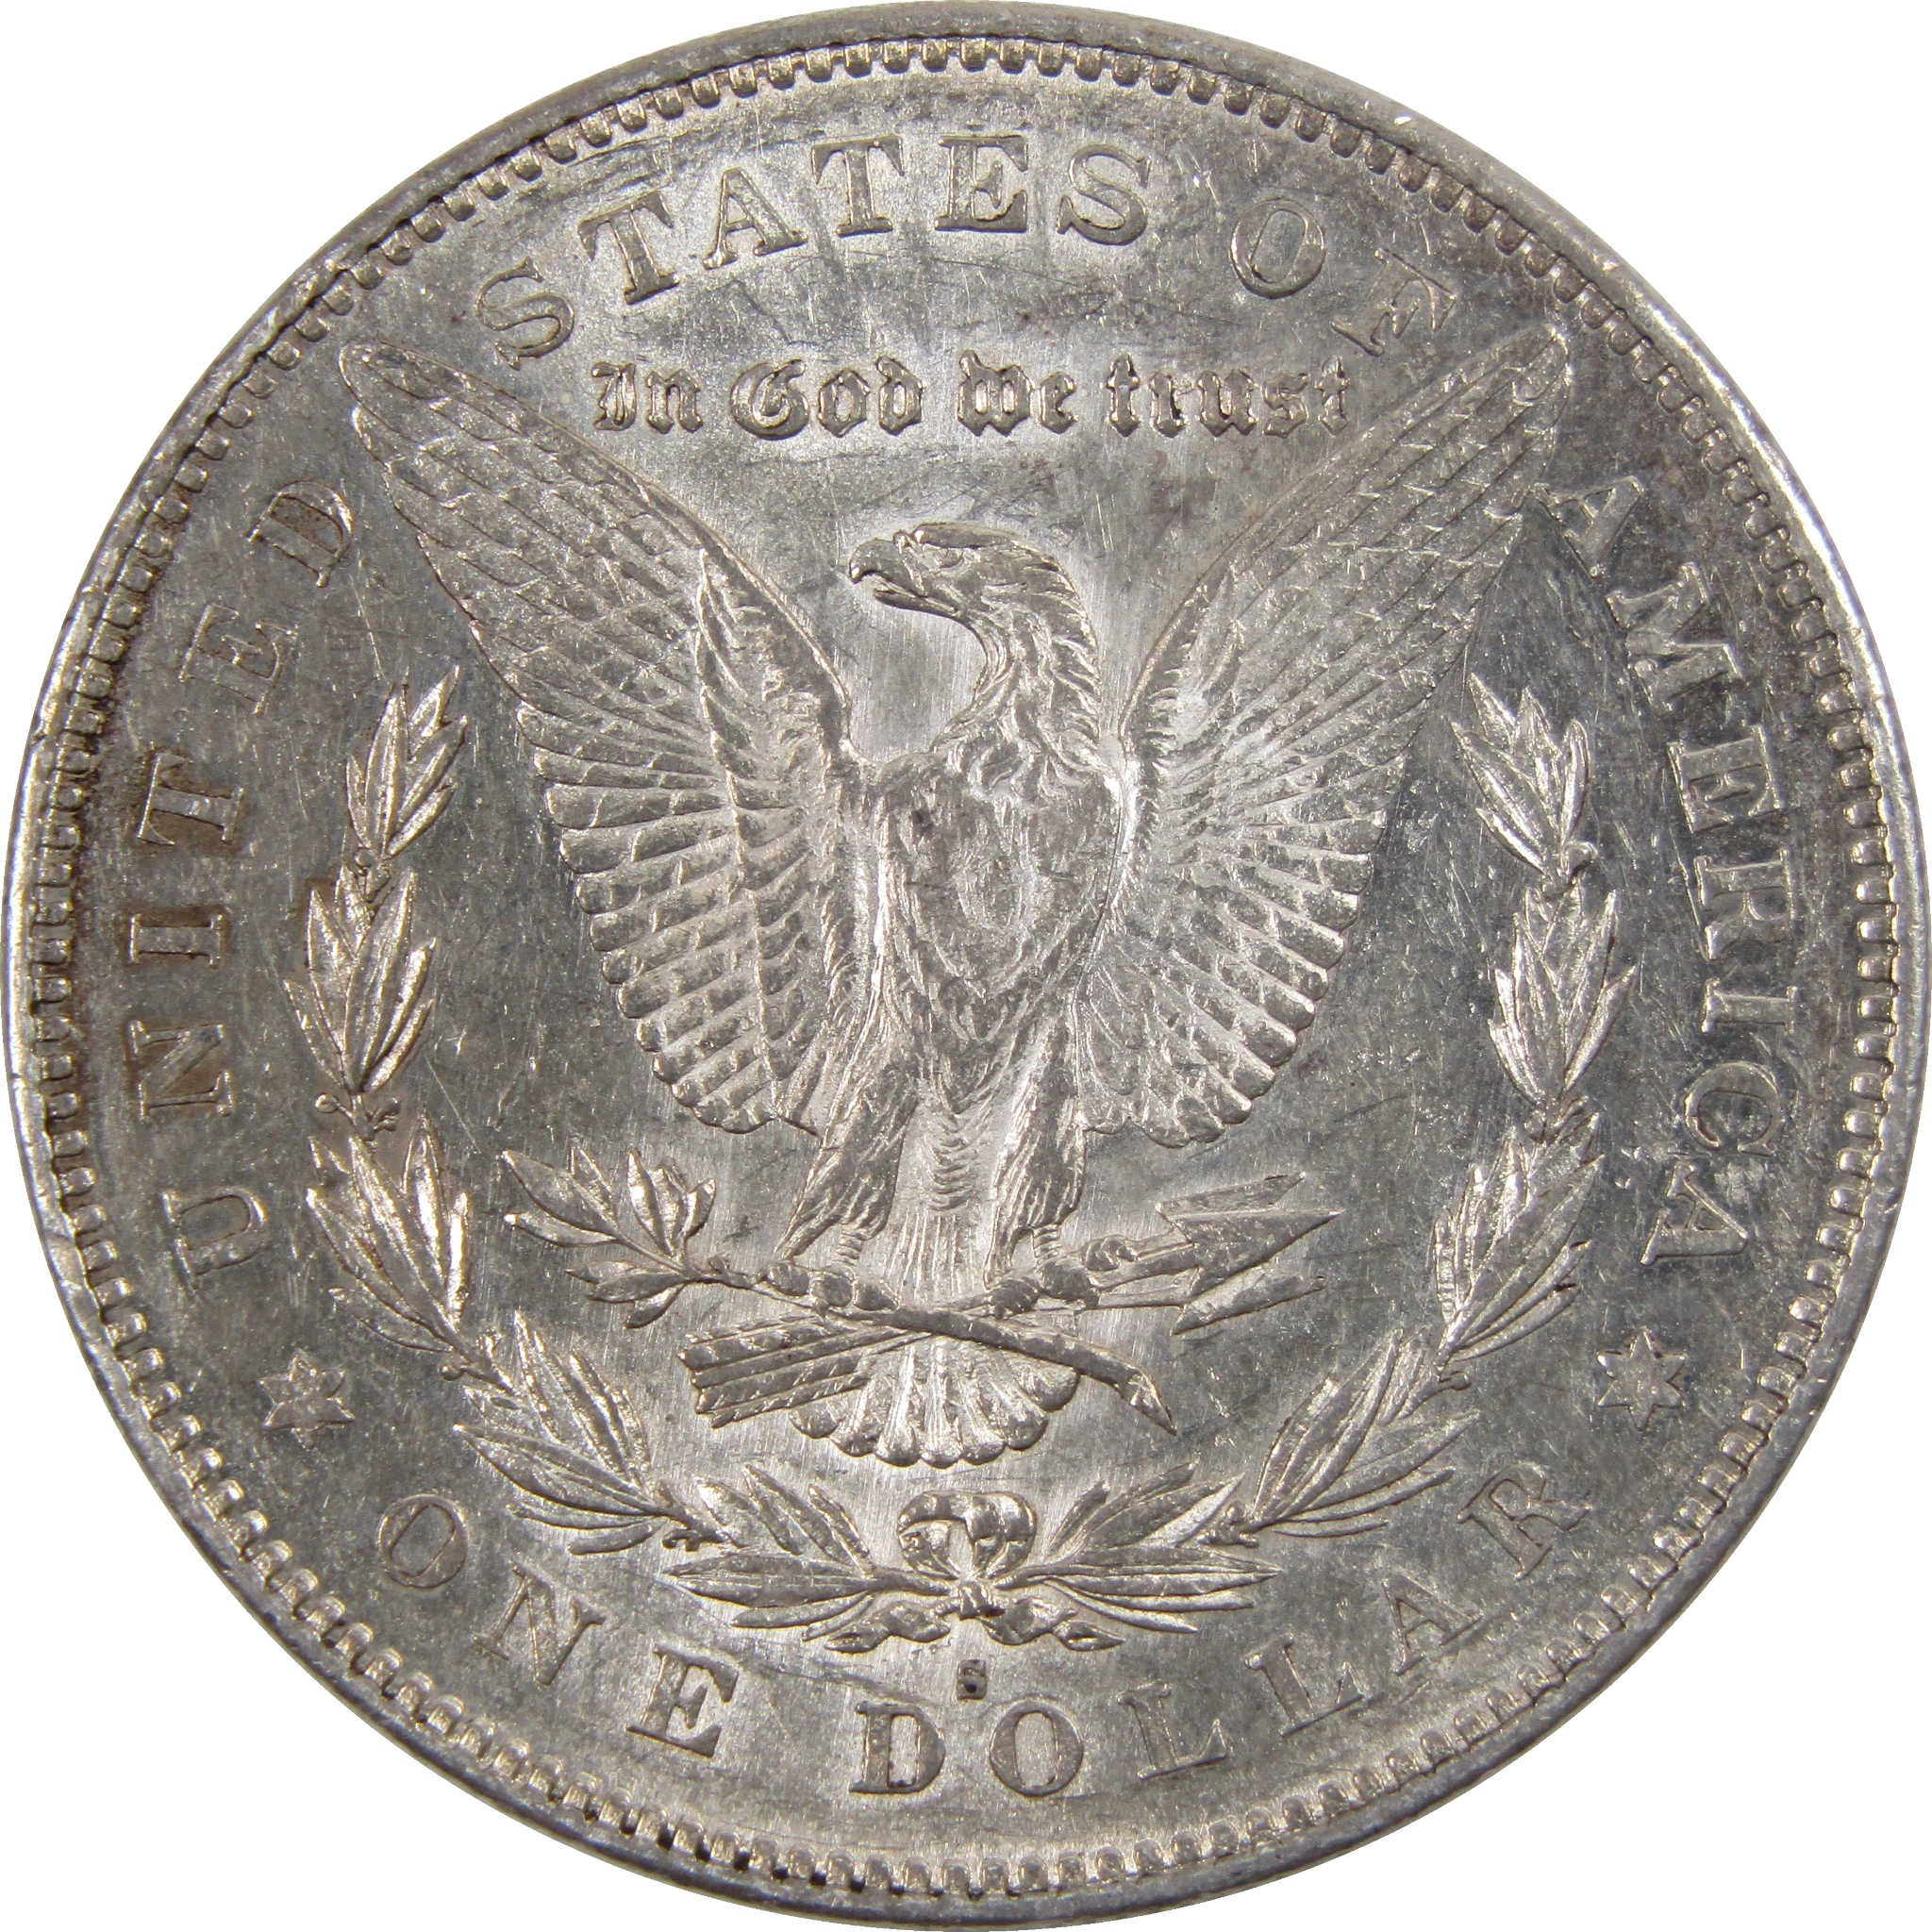 1879 S Rev 78 Morgan Dollar AU About Uncirculated 90% Silver SKU:I3477 - Morgan coin - Morgan silver dollar - Morgan silver dollar for sale - Profile Coins &amp; Collectibles